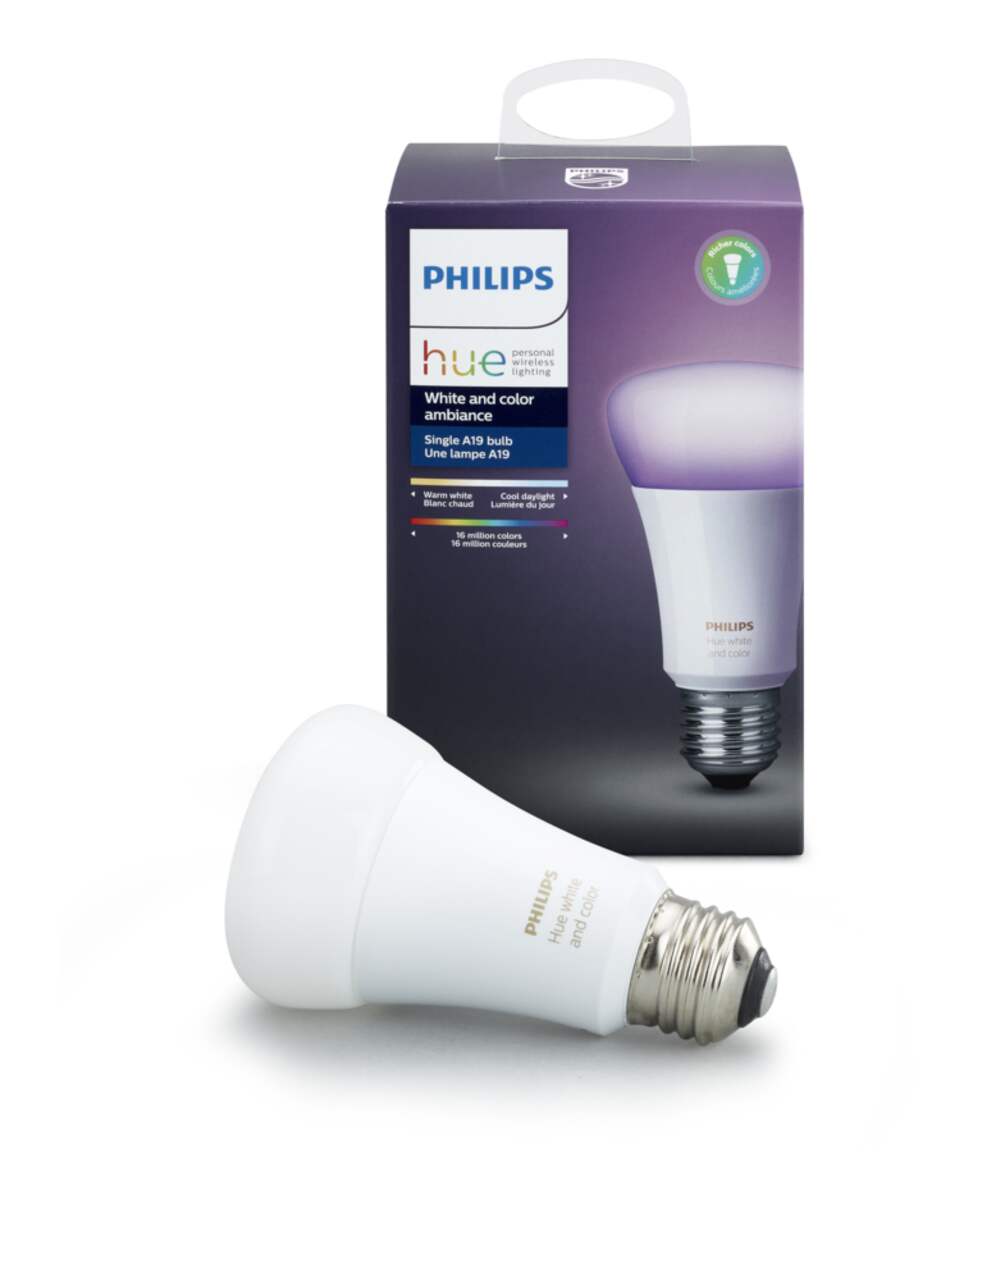 https://media-www.canadiantire.ca/product/fixing/electrical/light-bulbs/0529842/philips-hue-a19-color-and-white-led-bulb-9e9b2b93-5d42-4aaa-8867-33b42ca3cc5f.png?imdensity=1&imwidth=1244&impolicy=mZoom